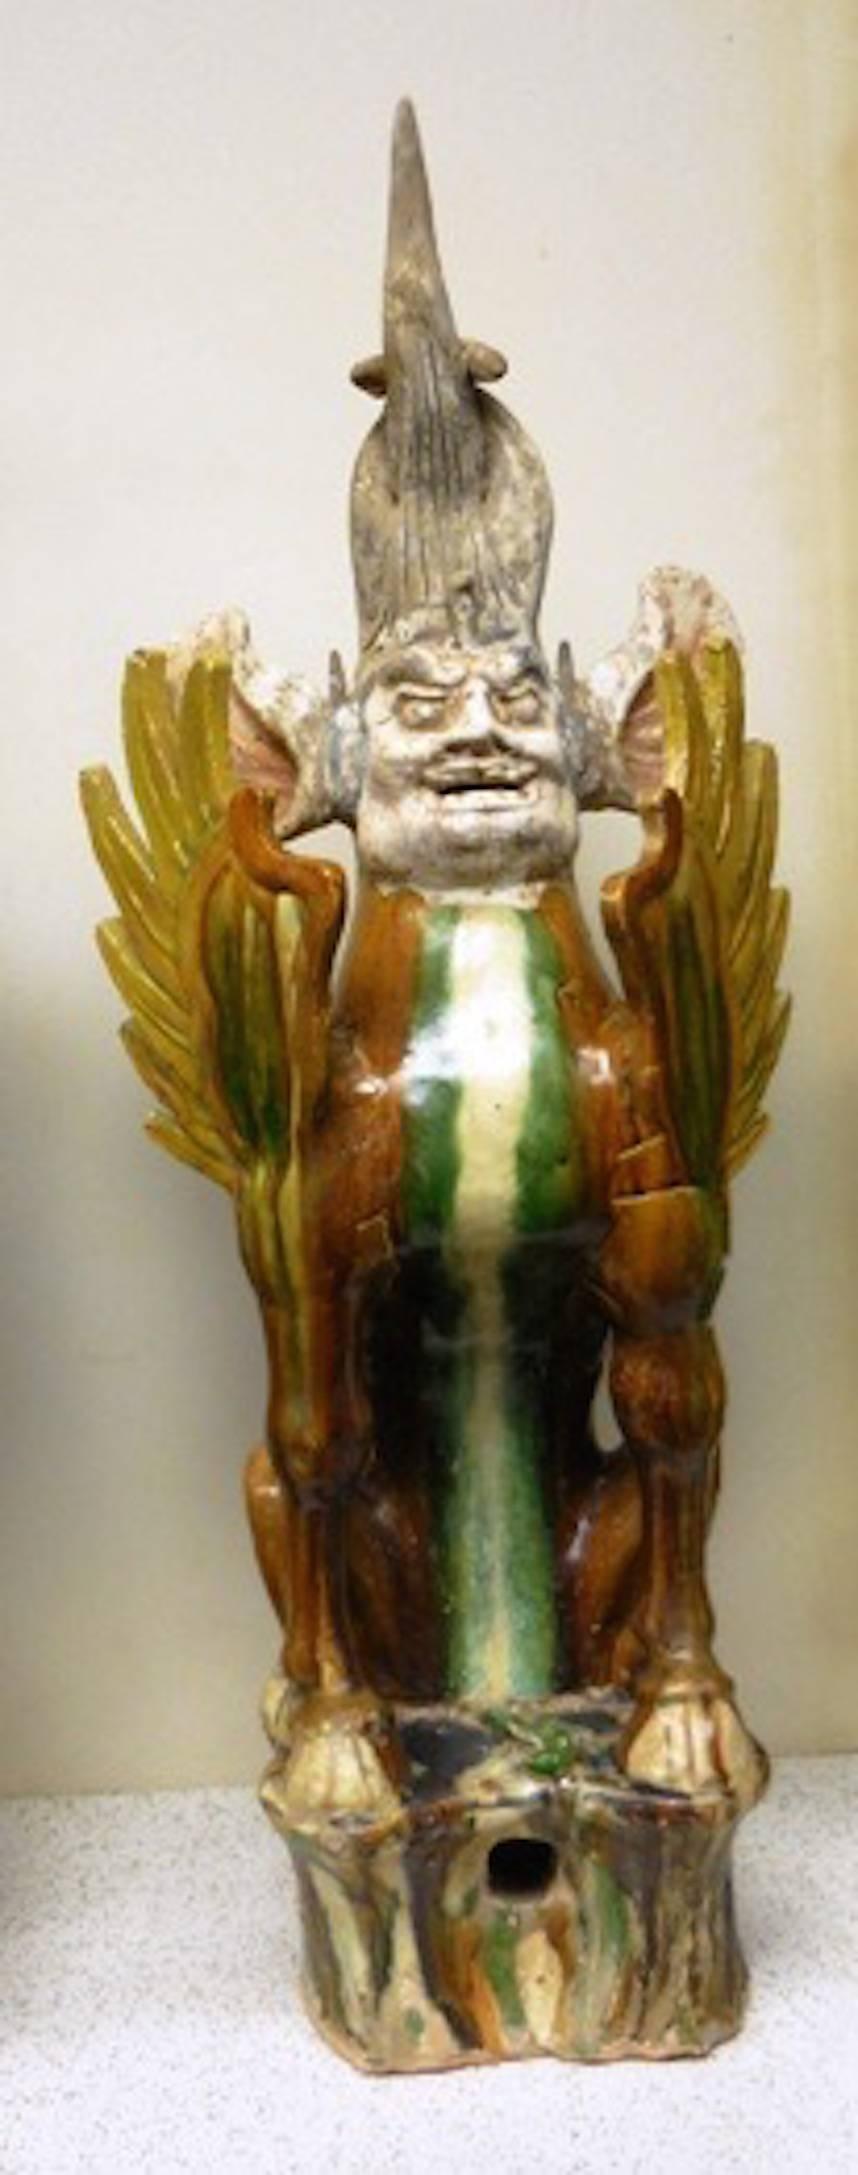 Offered by J R Richards
A pair of Tang dynasty Sancai glazed earth spirits.
Earth spirits normally are shown as a pair: One modeled in the form of a spirit animal (lion), and the other with human characteristics.
Shown here, the animal spirit with